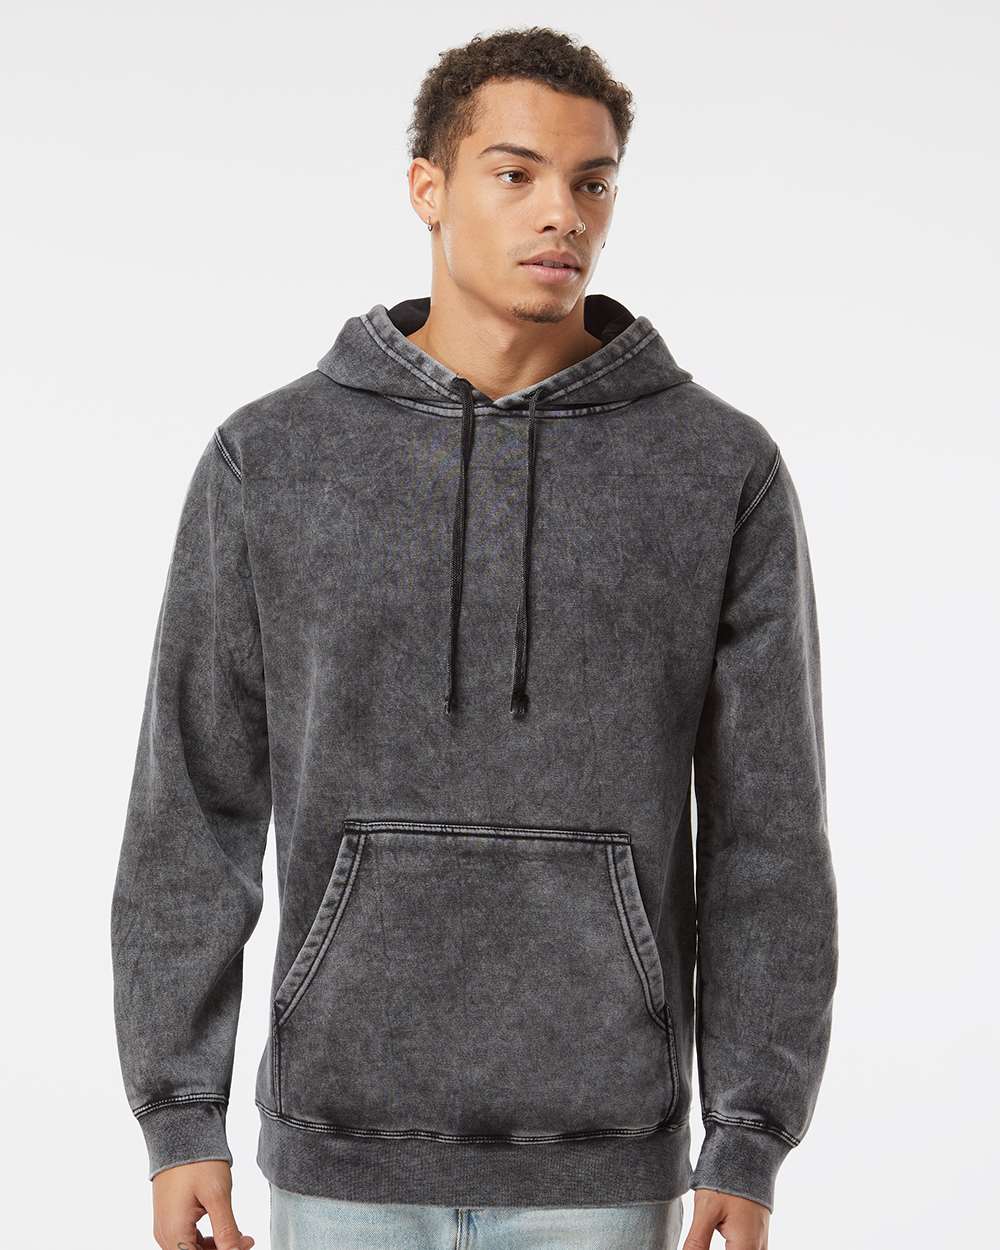 Midweight Mineral Wash Hooded Men's Sweatshirt - Independent Trading Co. PRM4500MW